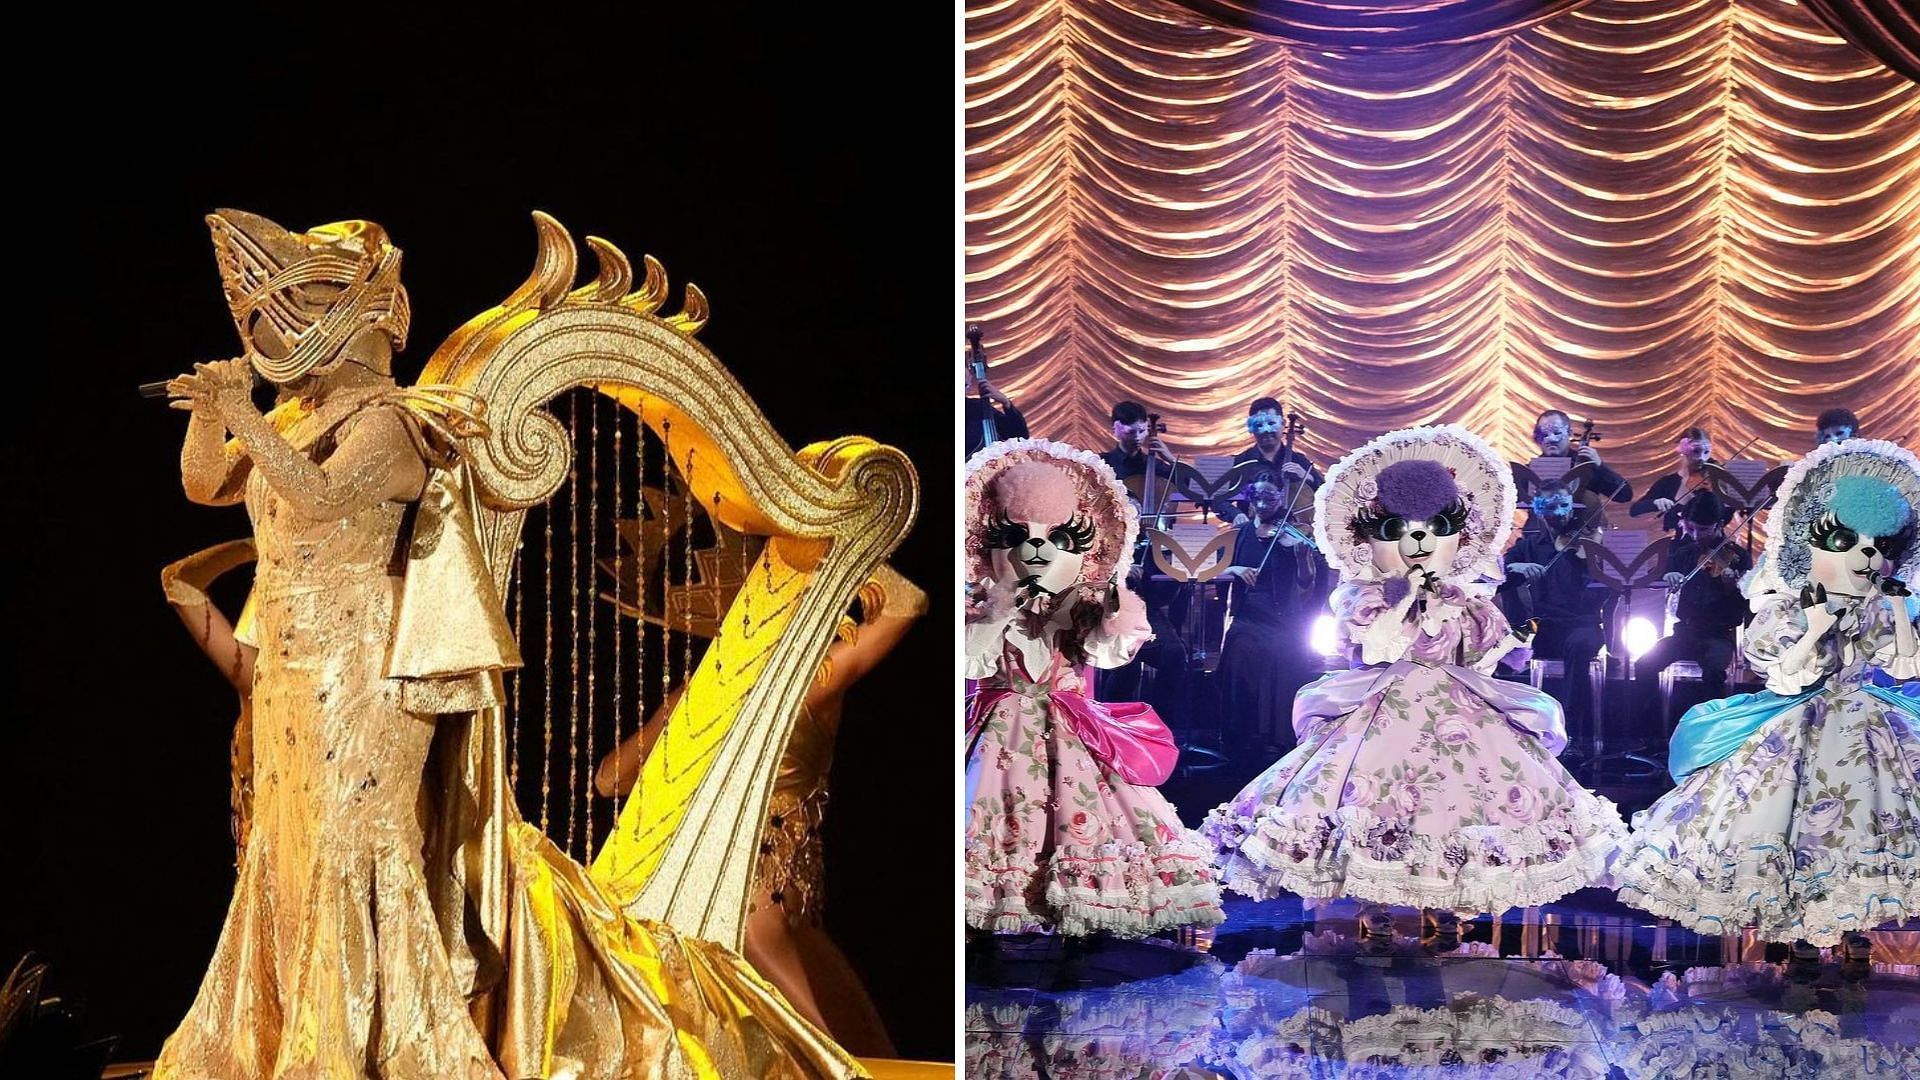 The Harp and The Lambs from The Masked Singer (Image via Instagram/@maskedsingerfox)